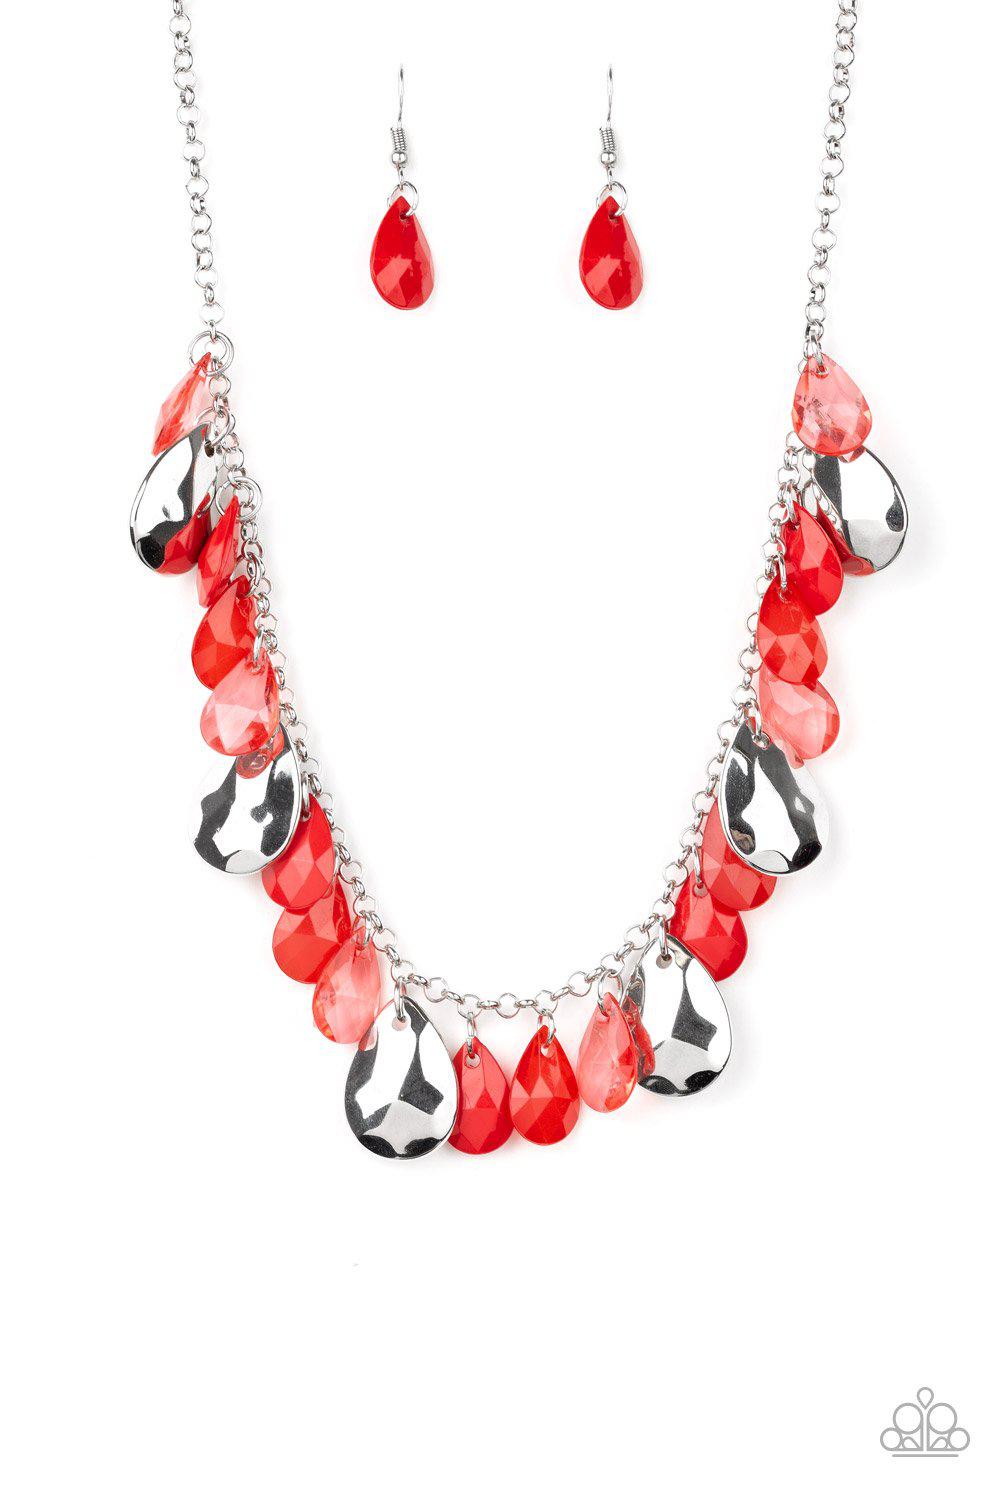 Hurricane Season Red and Silver Necklace - Paparazzi Accessories - lightbox -CarasShop.com - $5 Jewelry by Cara Jewels